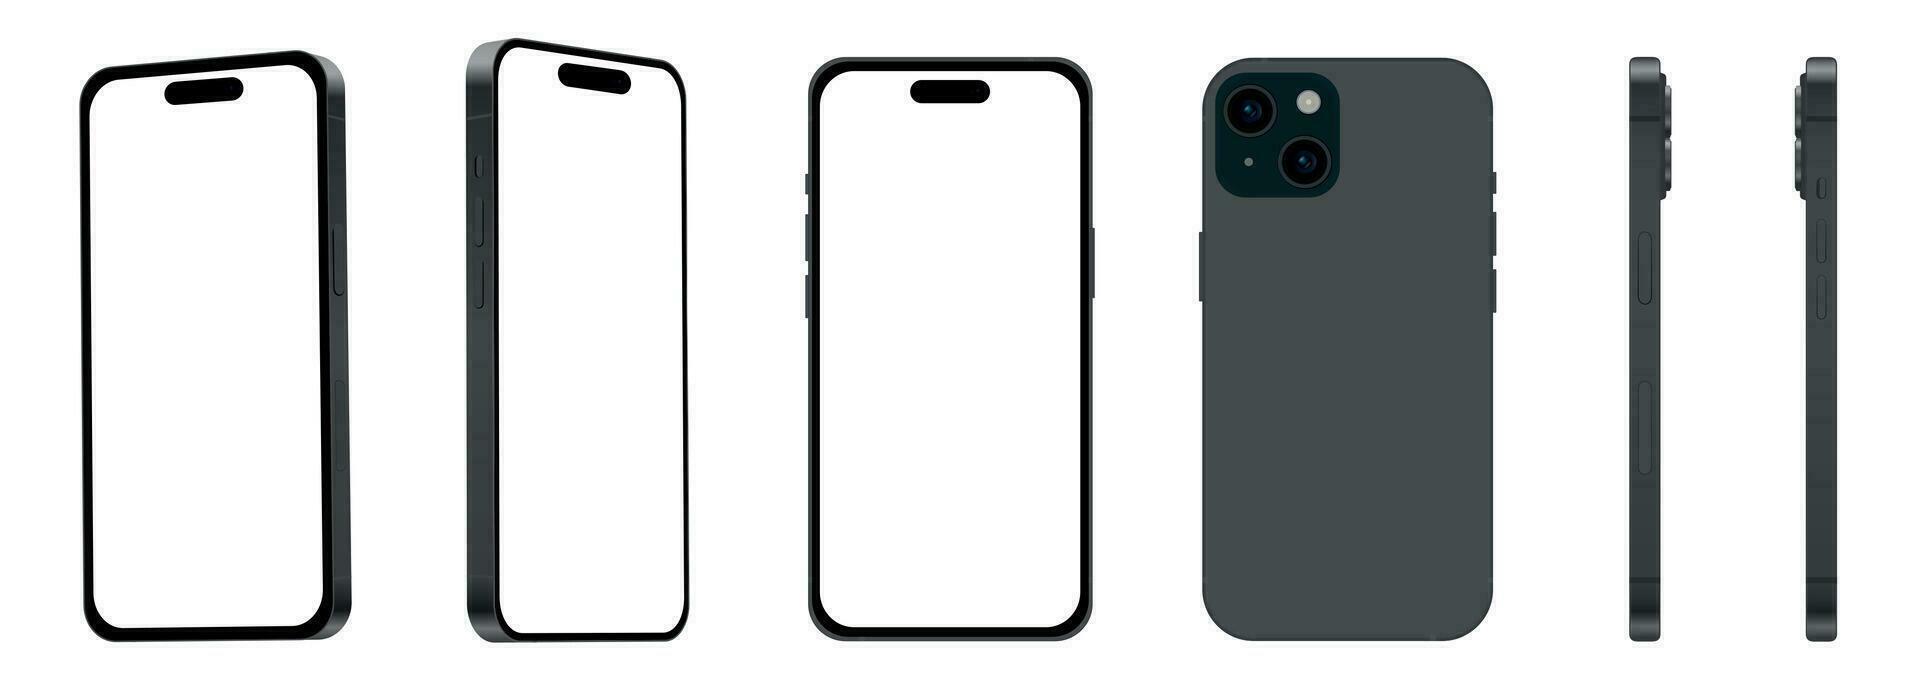 Set of 6 items from different angles, 15 black smartphone models NEW, mockup for web design on white background vector